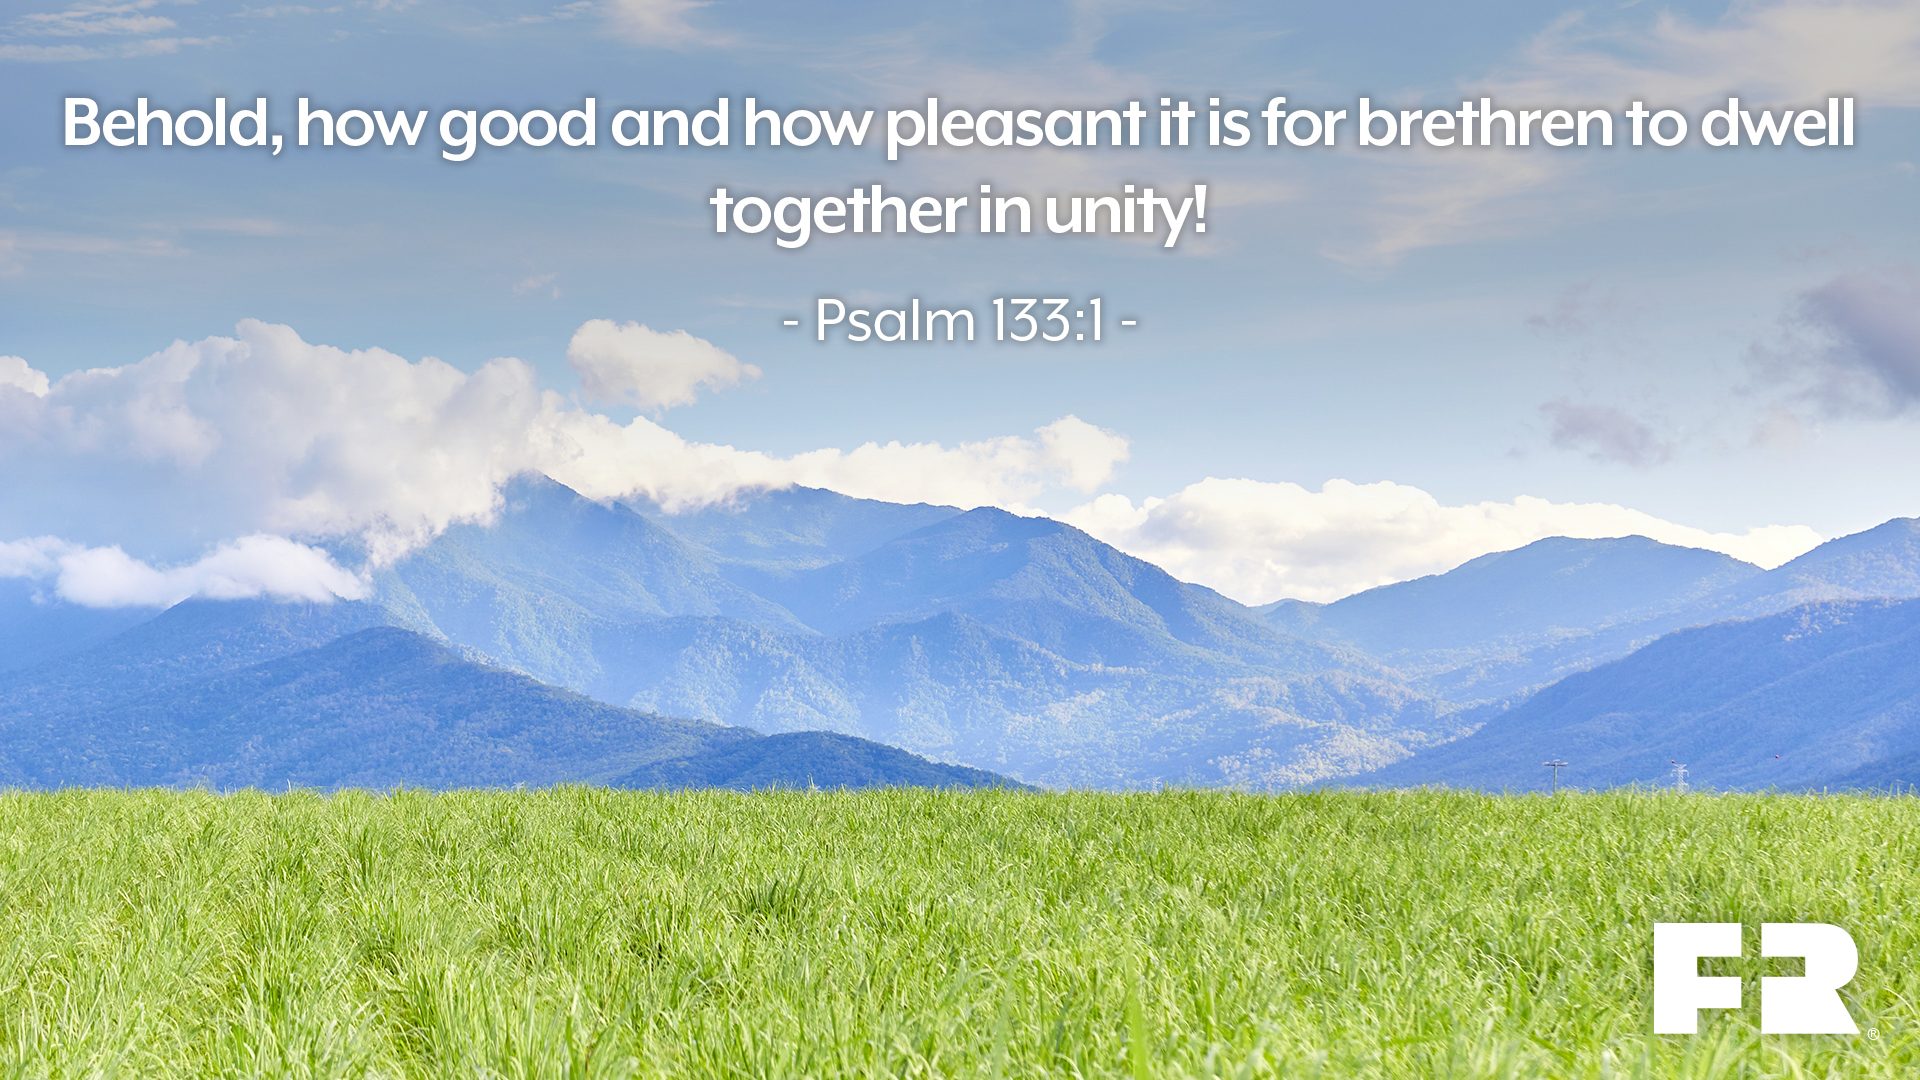 "Behold, how good and how pleasant it is for brethren to dwell together in unity!"